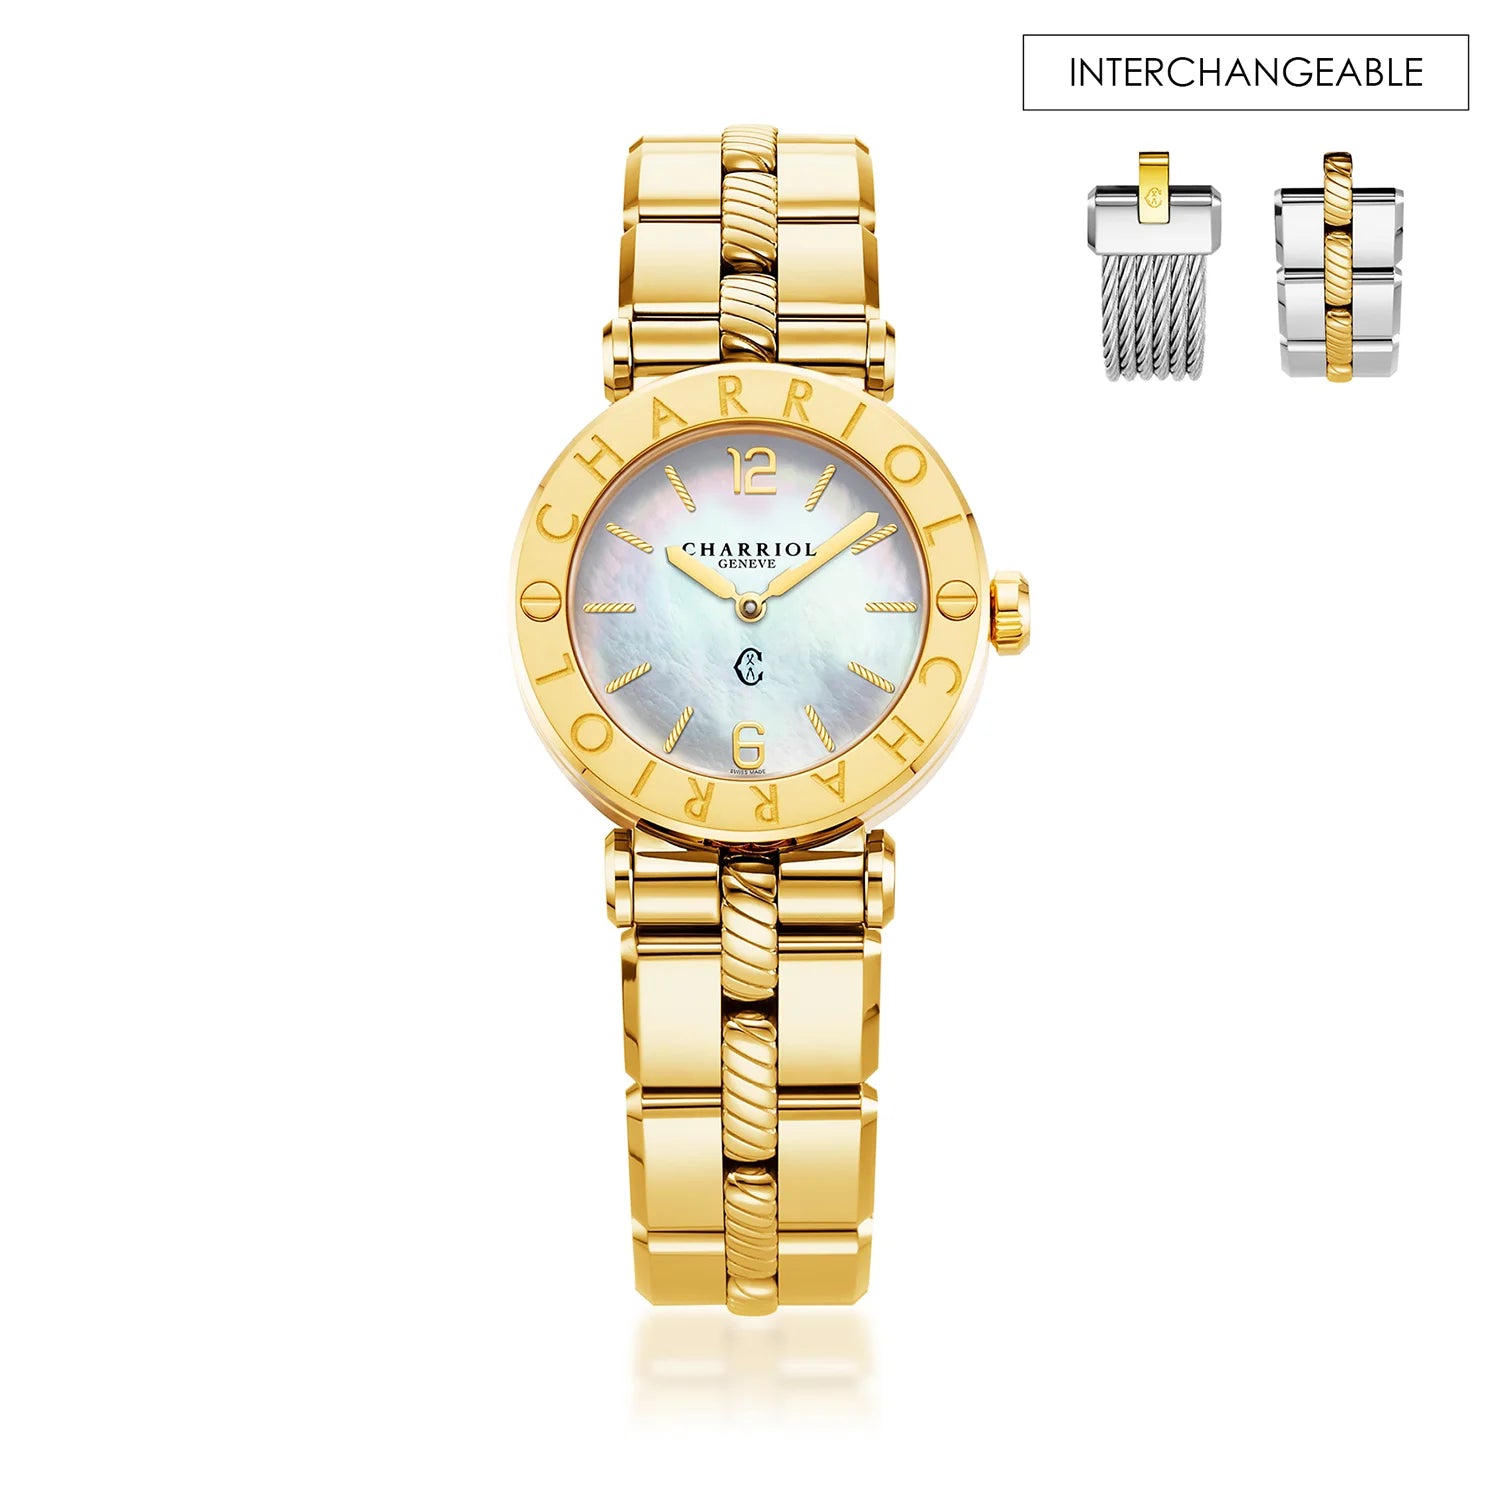 St Tropez Cruise Watch White and Yellow GoldSt Tropez Cruise 28mm Watch Yellow Gold Bracelet, Yellow Gold & 2 Screws Bezel and White MOP Dial